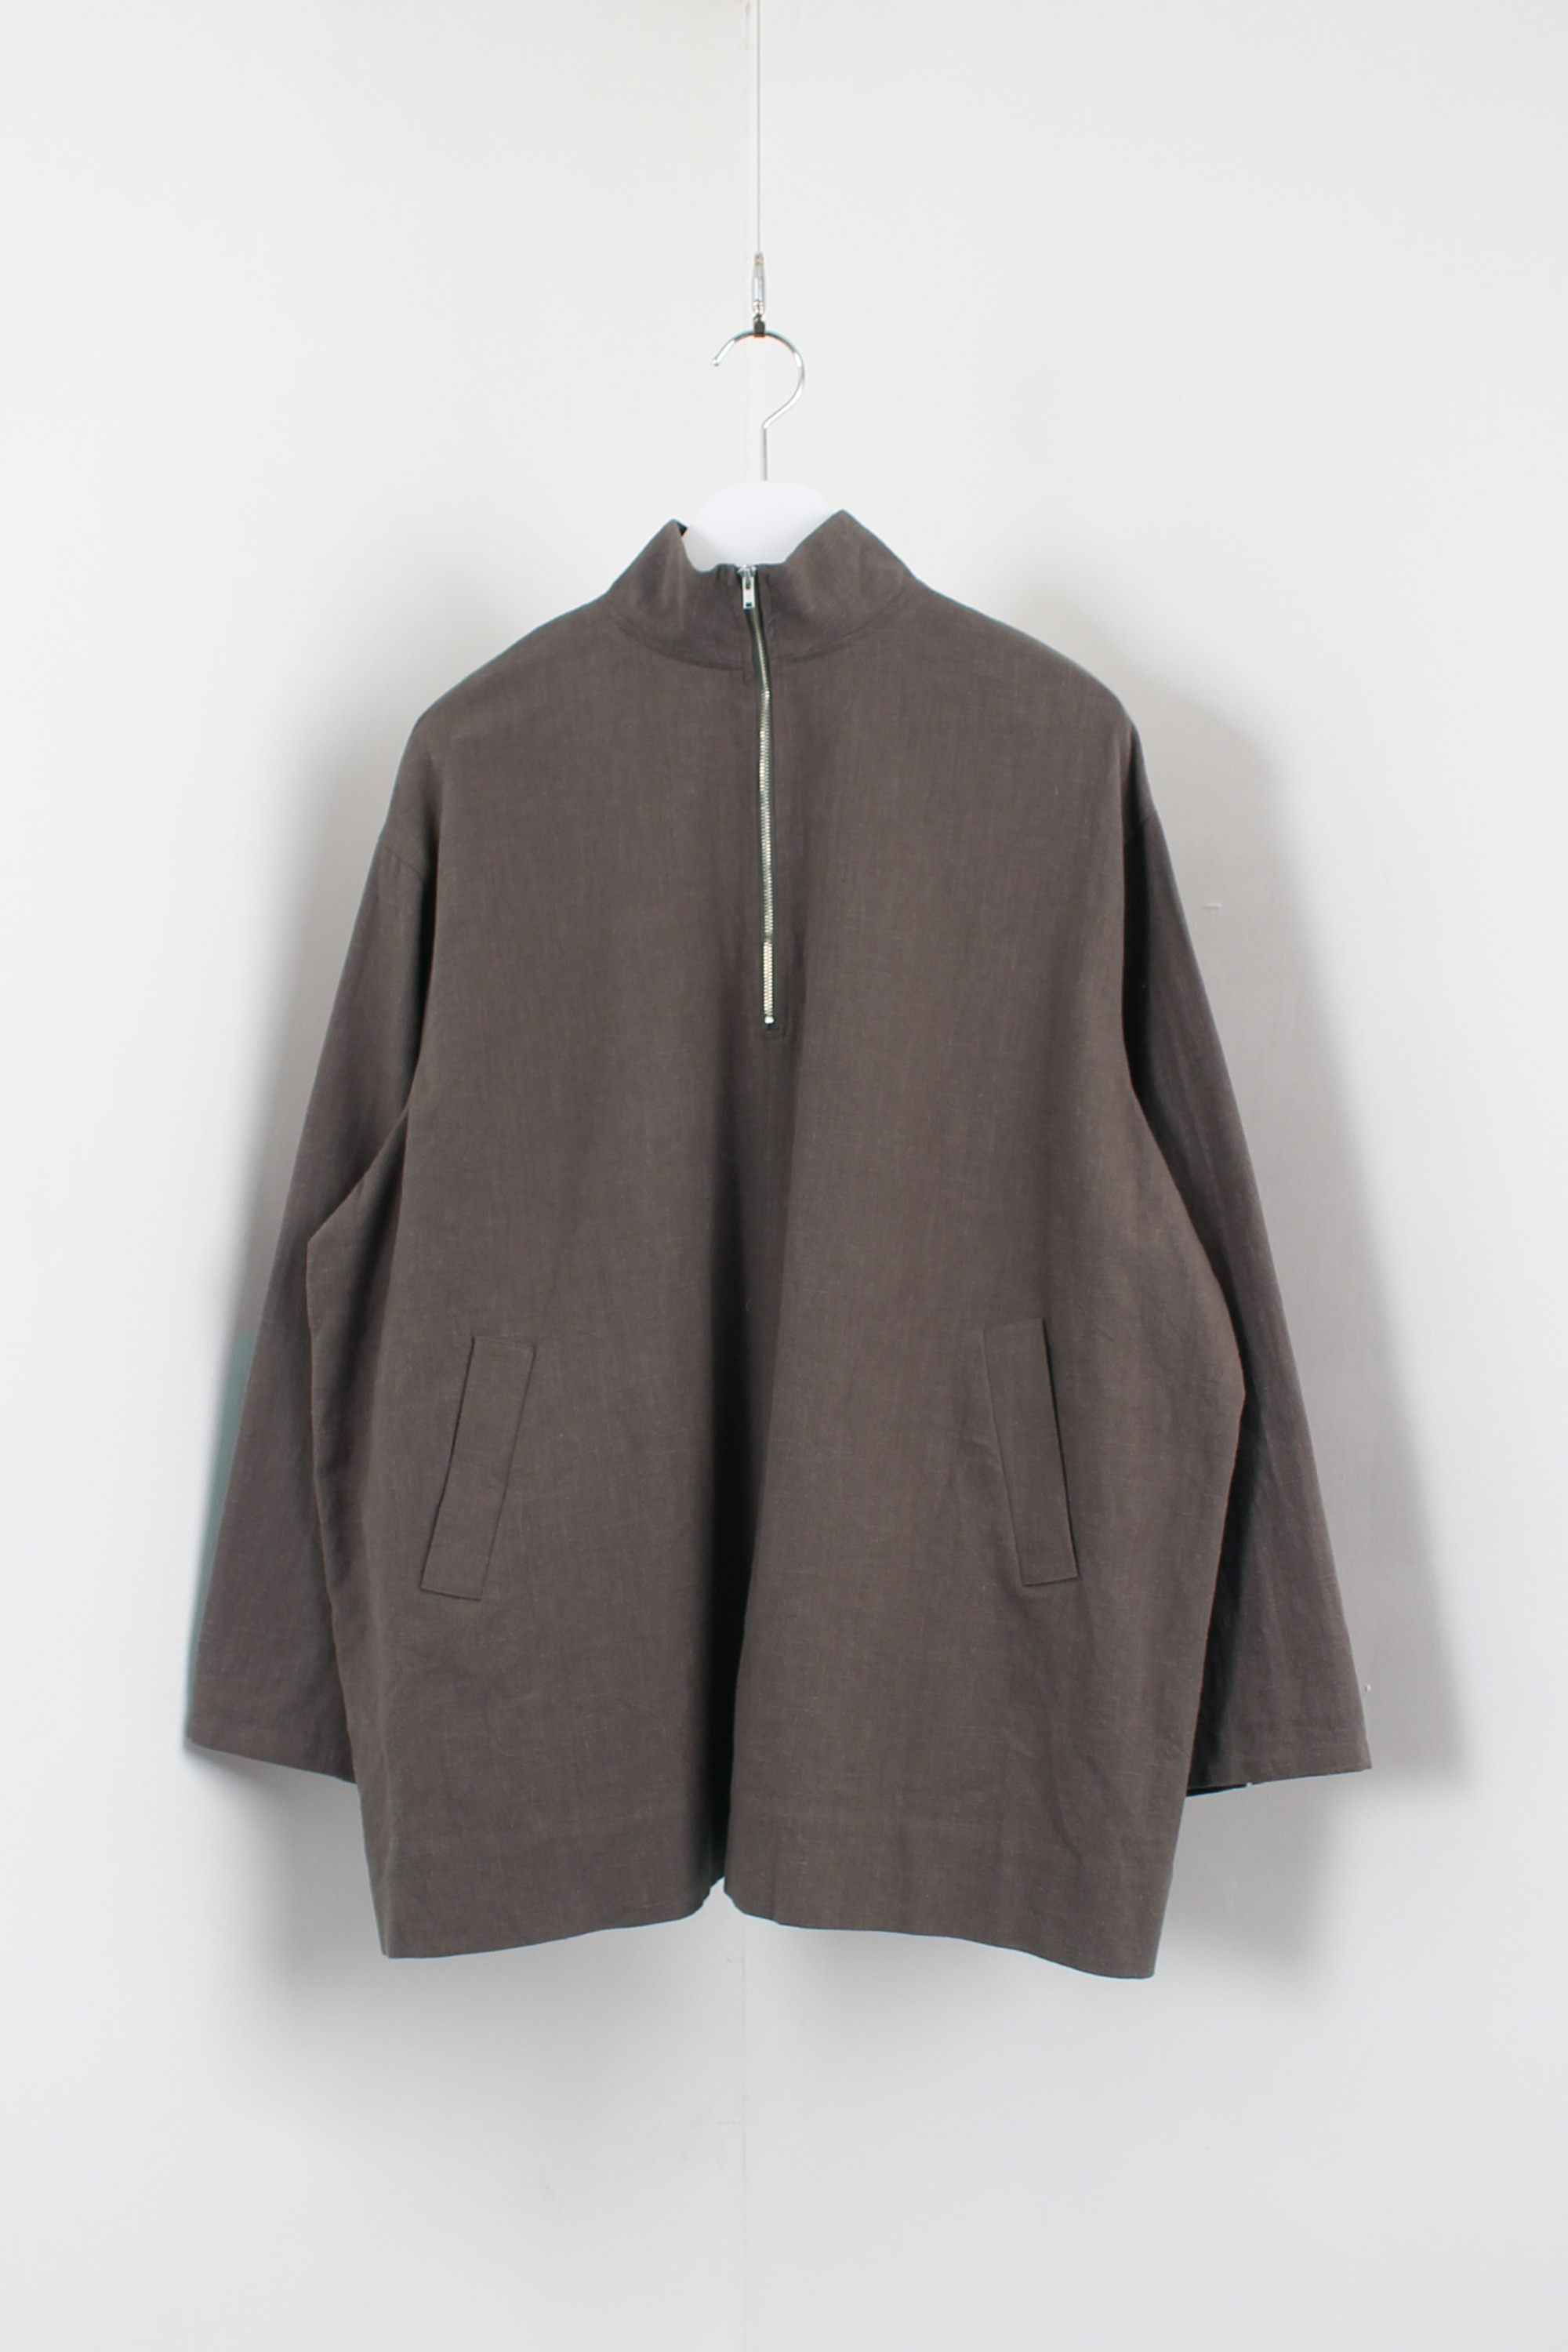 OUTERSUNSET pullover shirt